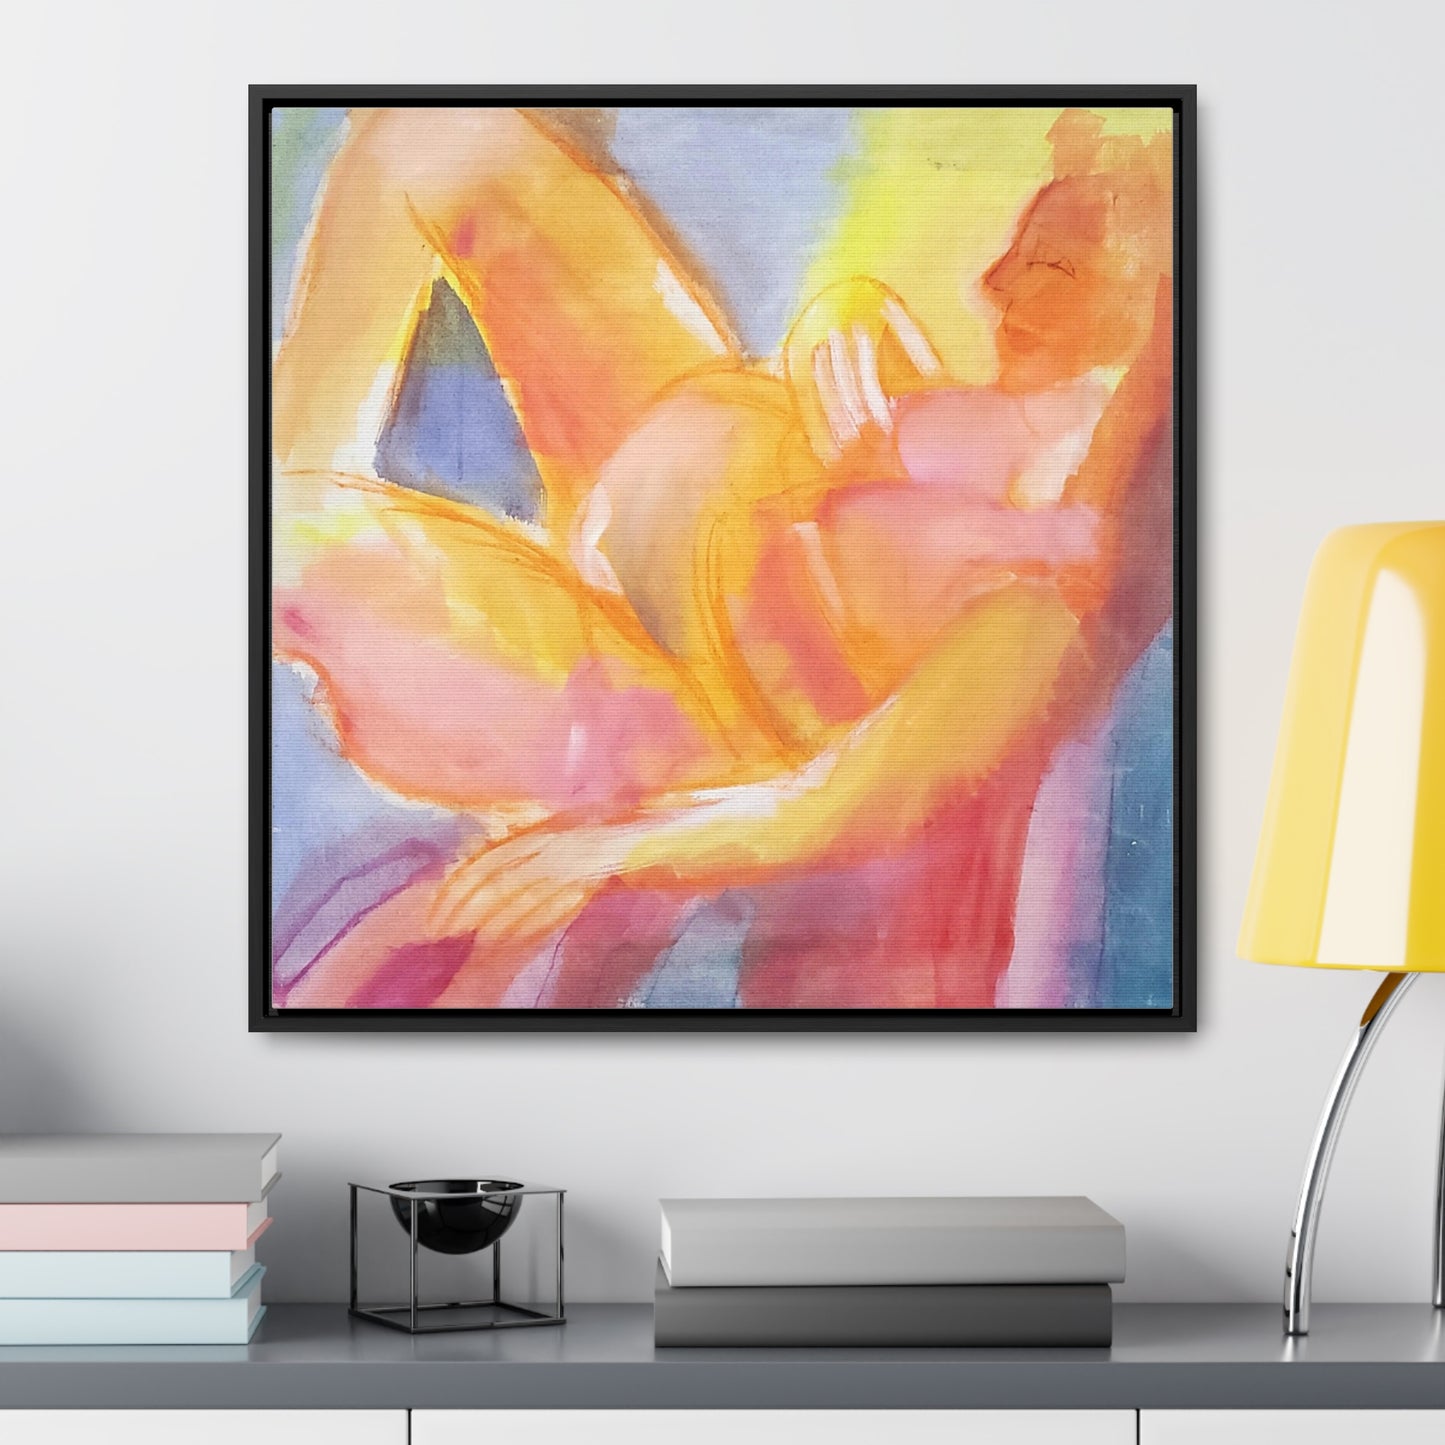 in her artwork titled "Enchantment," Yi-li Chin Ward captures a moment of pure tranquility and peacefulness. The image depicts a sleeping figure basked in a golden light, which reflects on her pale skin, giving her a divine aura.